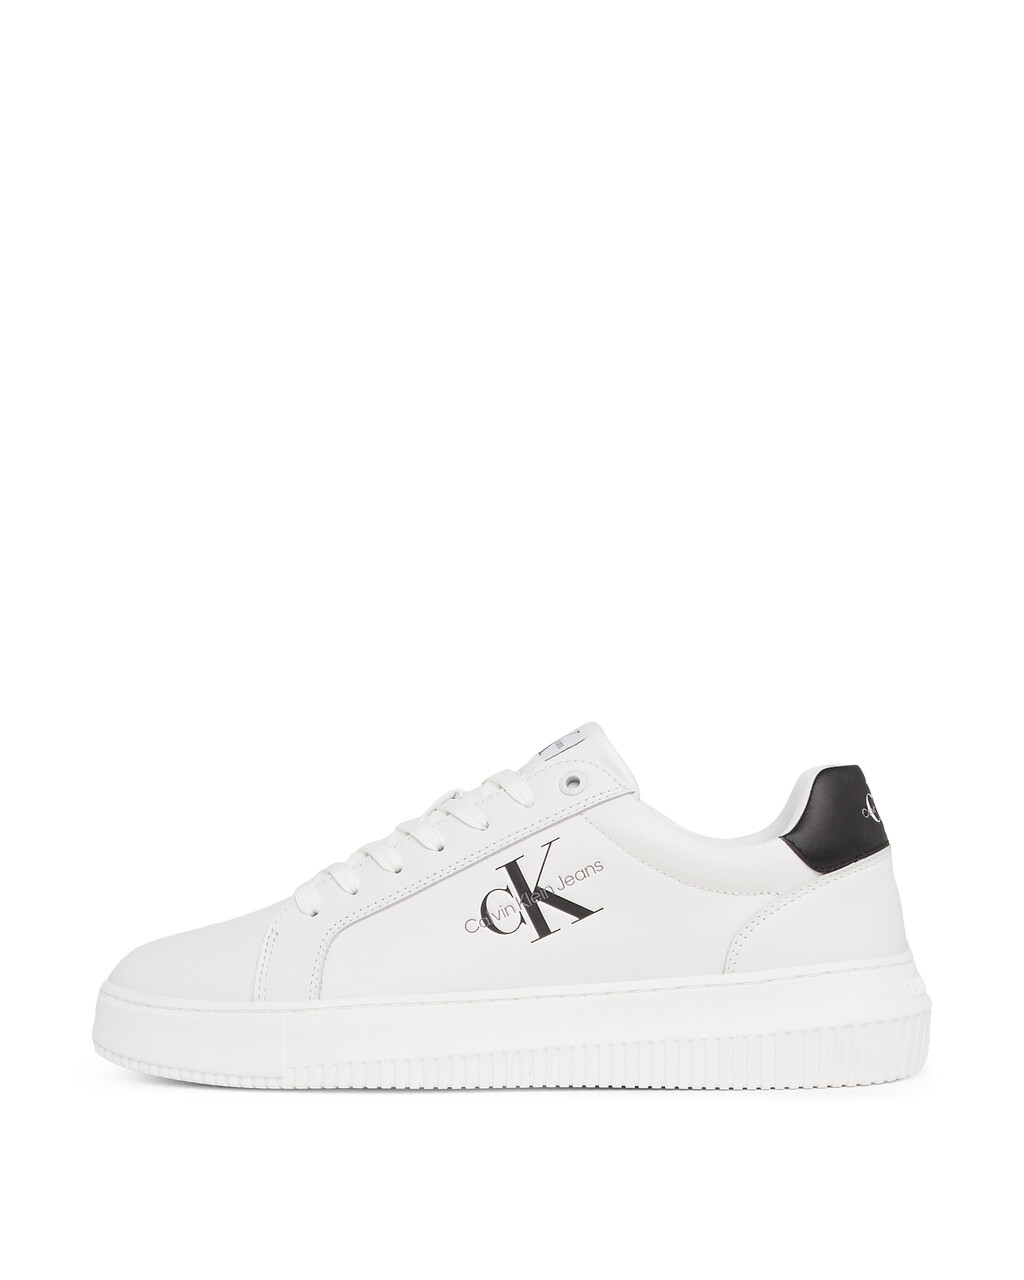 Leather Trainers, White/Black, hi-res